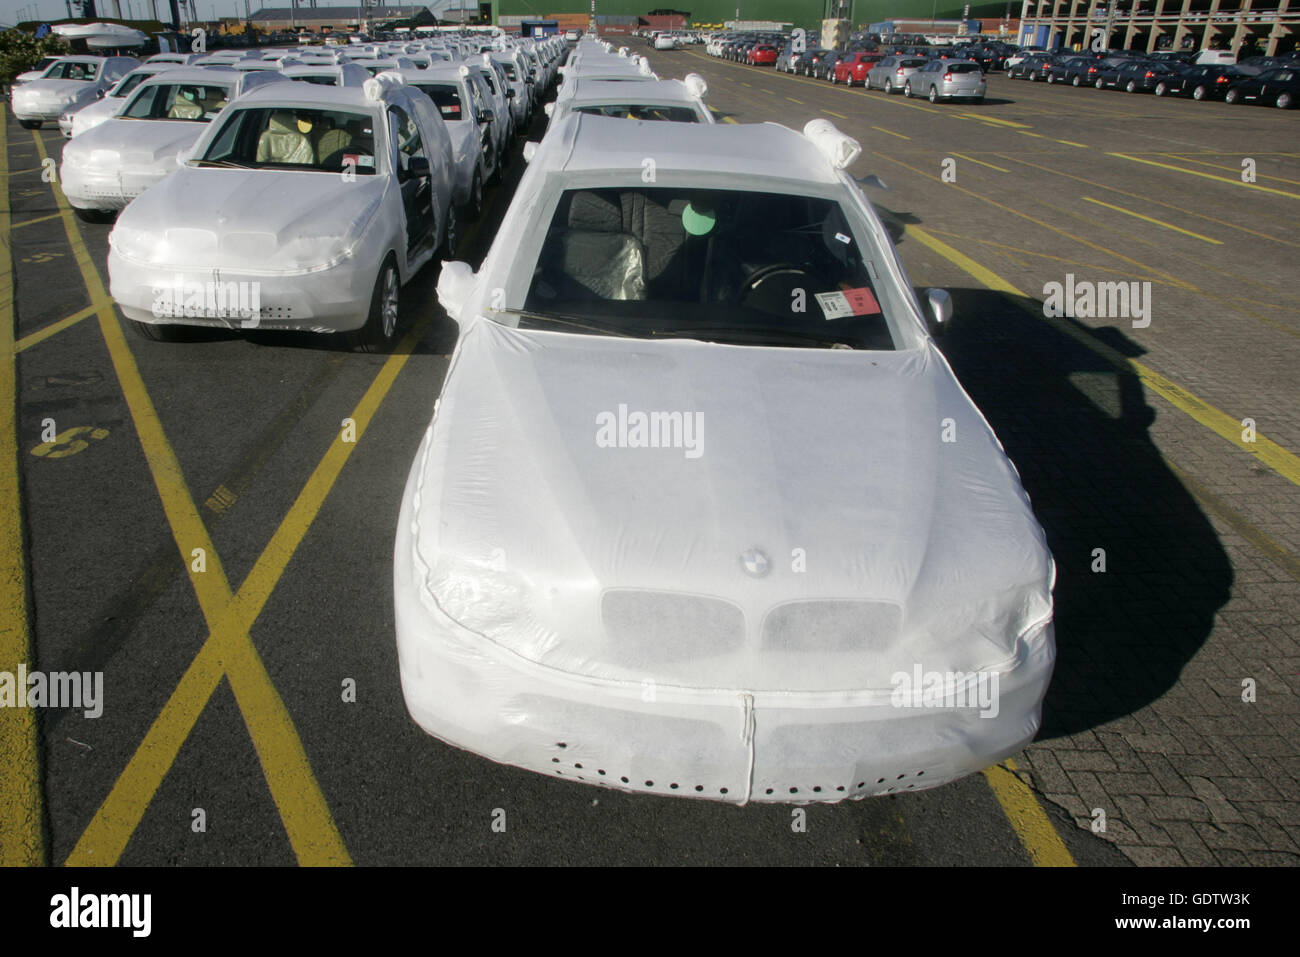 Imported new BMW cars Stock Photo